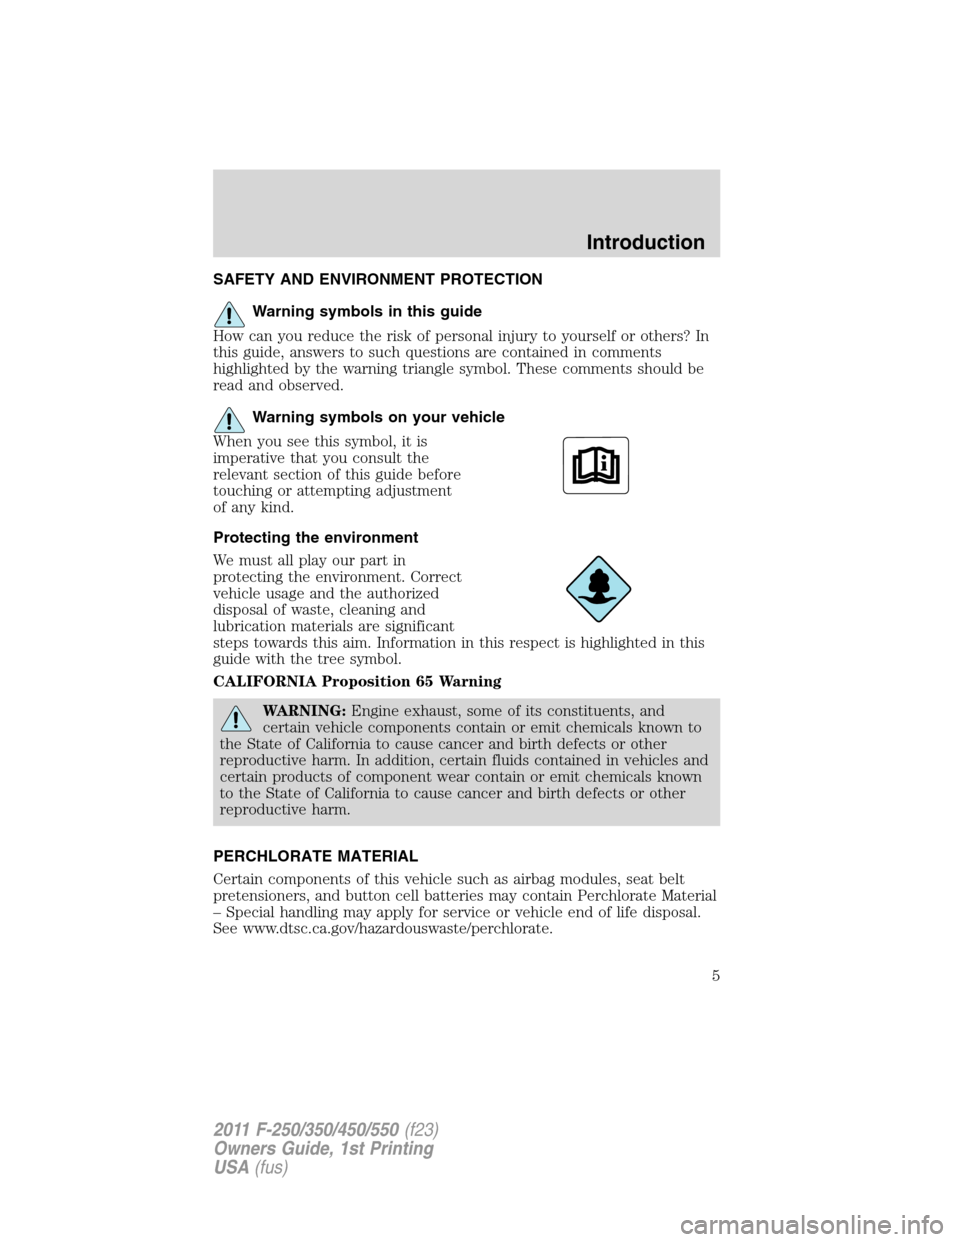 FORD SUPER DUTY 2011 3.G Owners Manual SAFETY AND ENVIRONMENT PROTECTION
Warning symbols in this guide
How can you reduce the risk of personal injury to yourself or others? In
this guide, answers to such questions are contained in comments